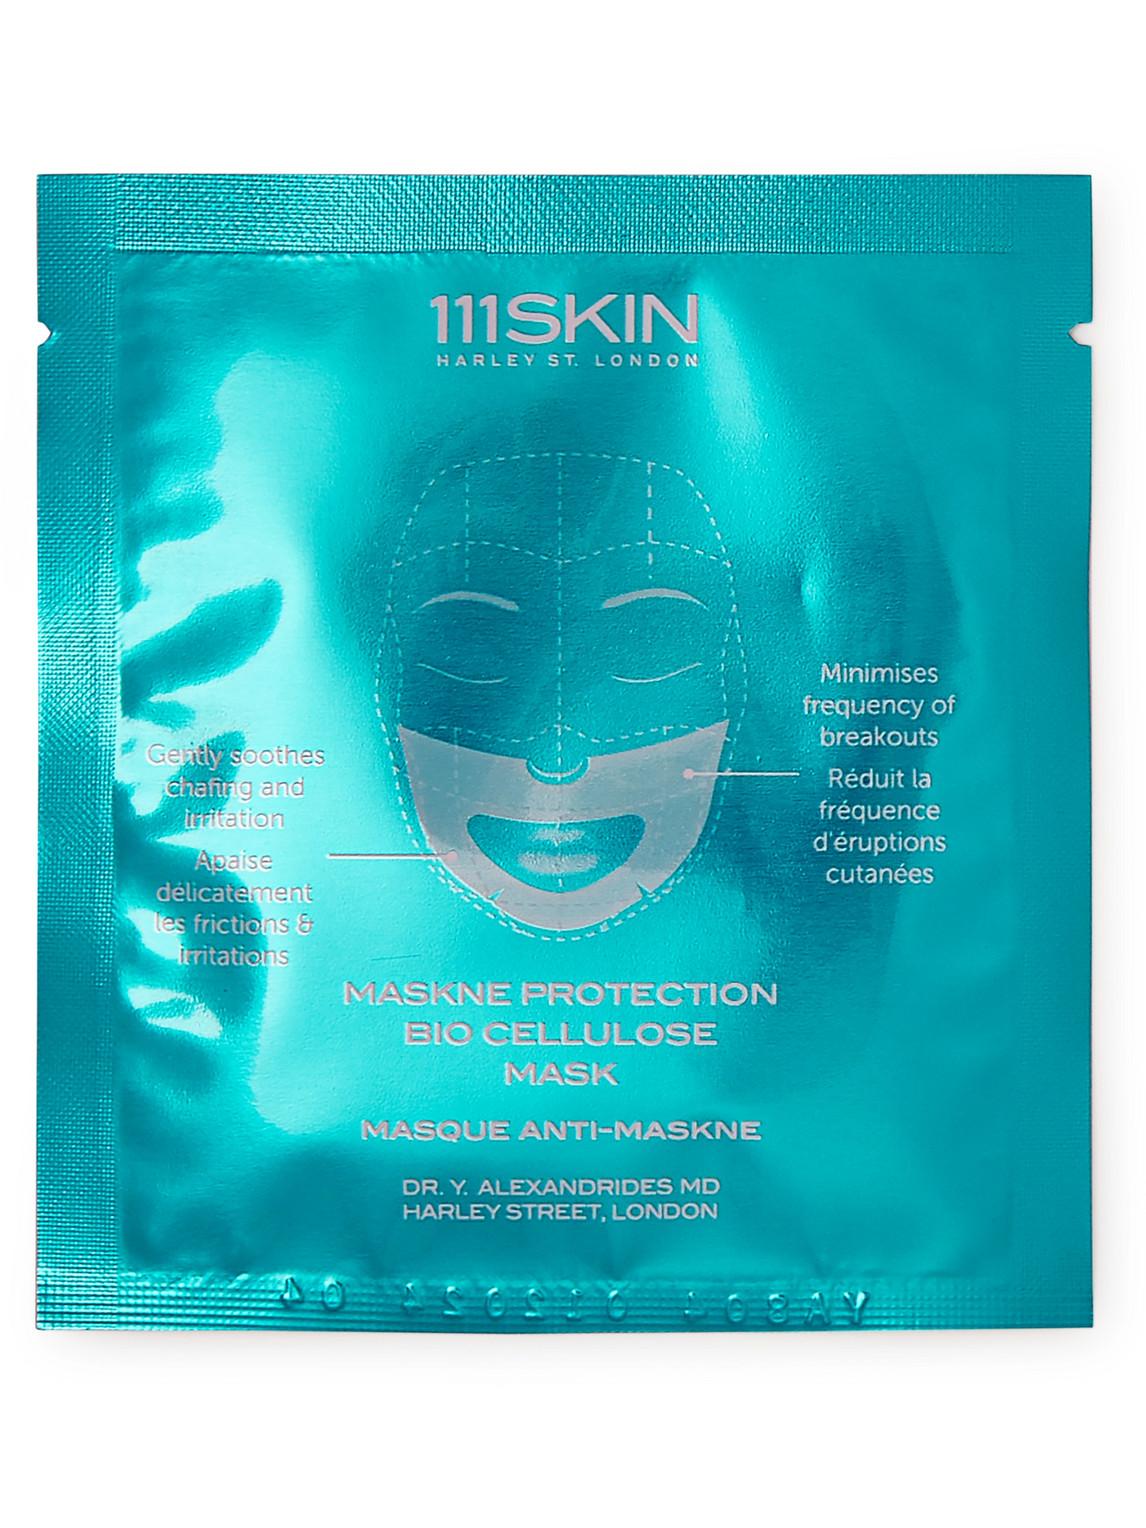 111skin Maskne Protection Bio-cellulose Mask, 10ml In Colorless